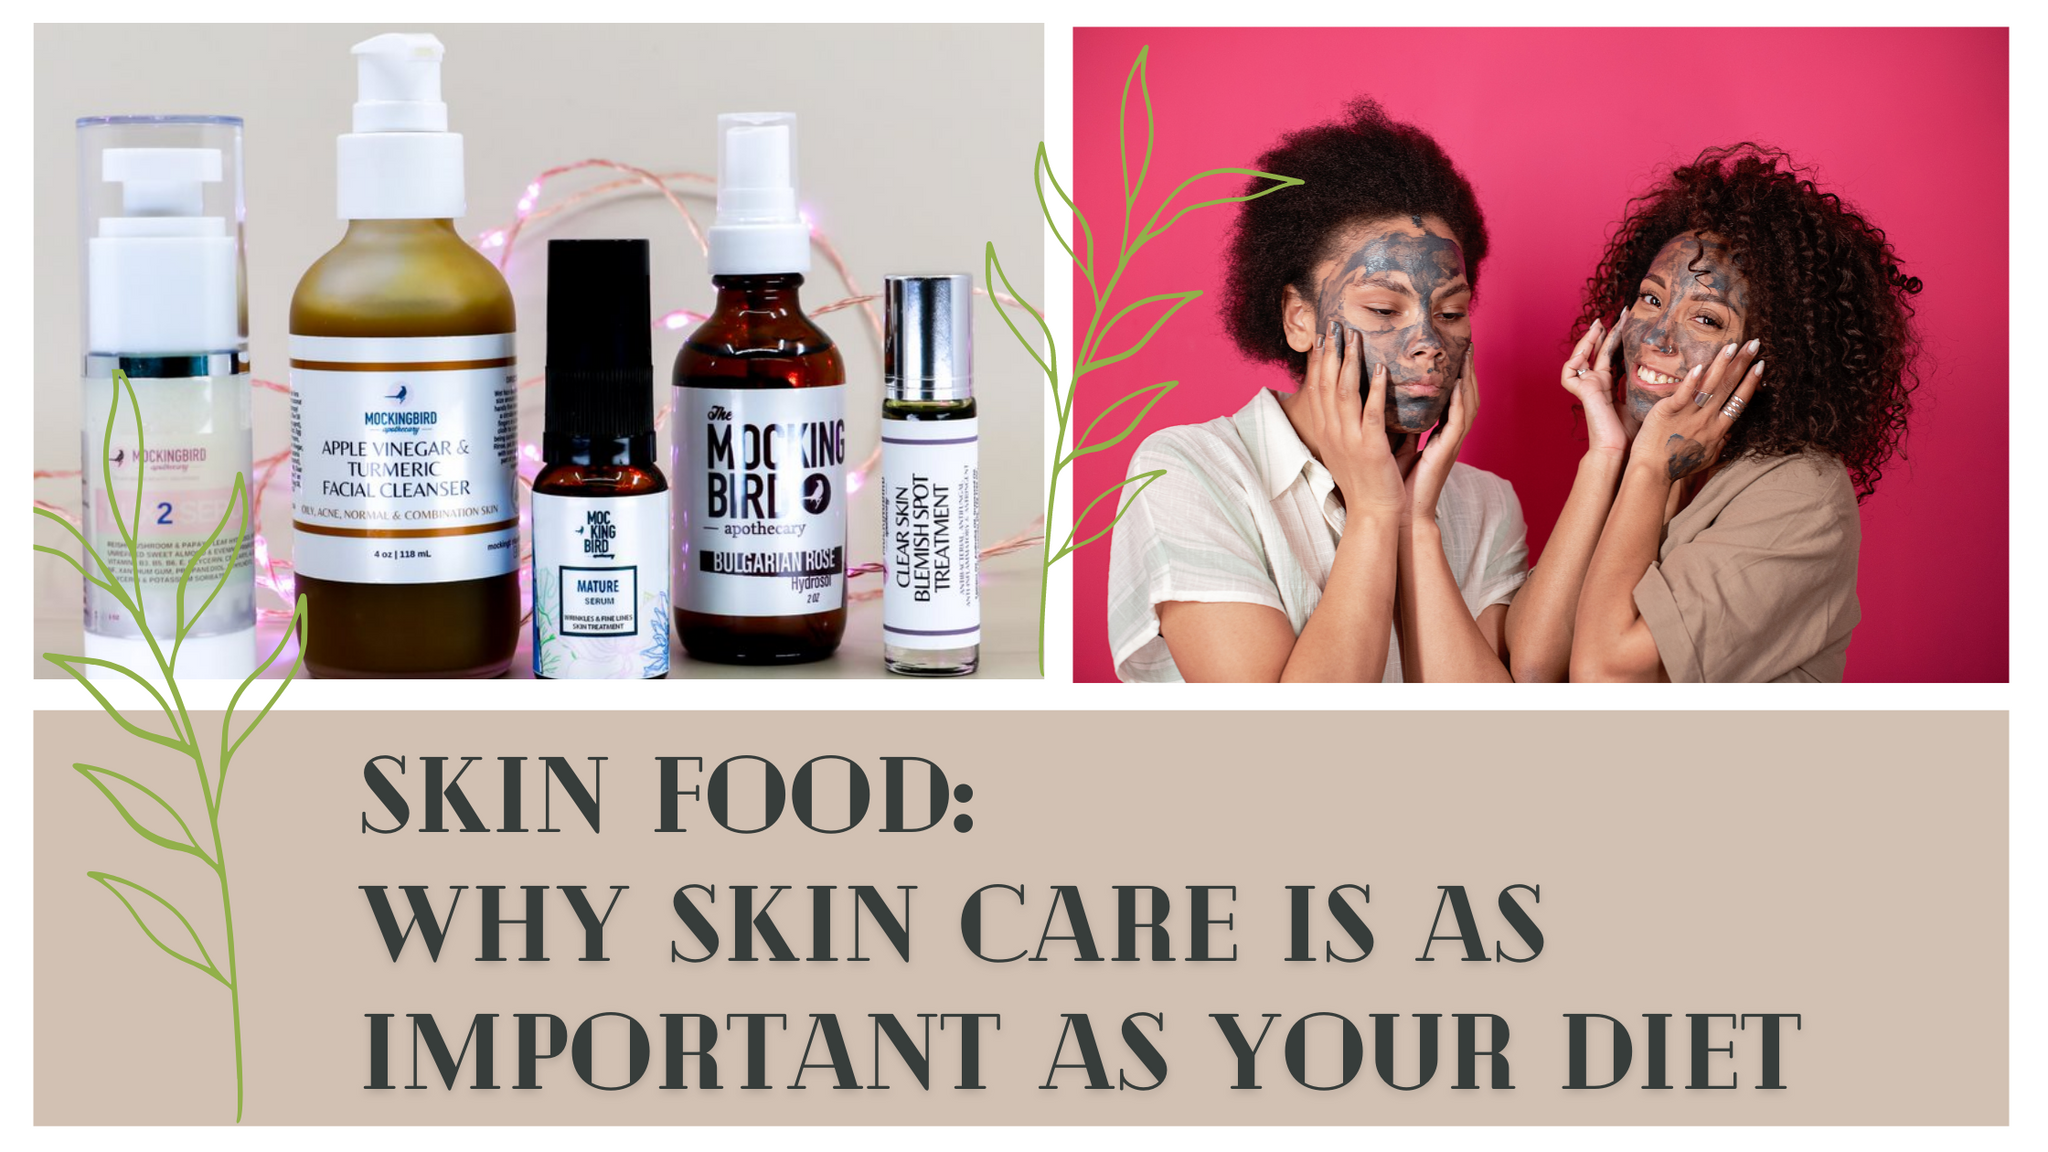 Skin Food: Why Skin Care is as Important as Your Diet